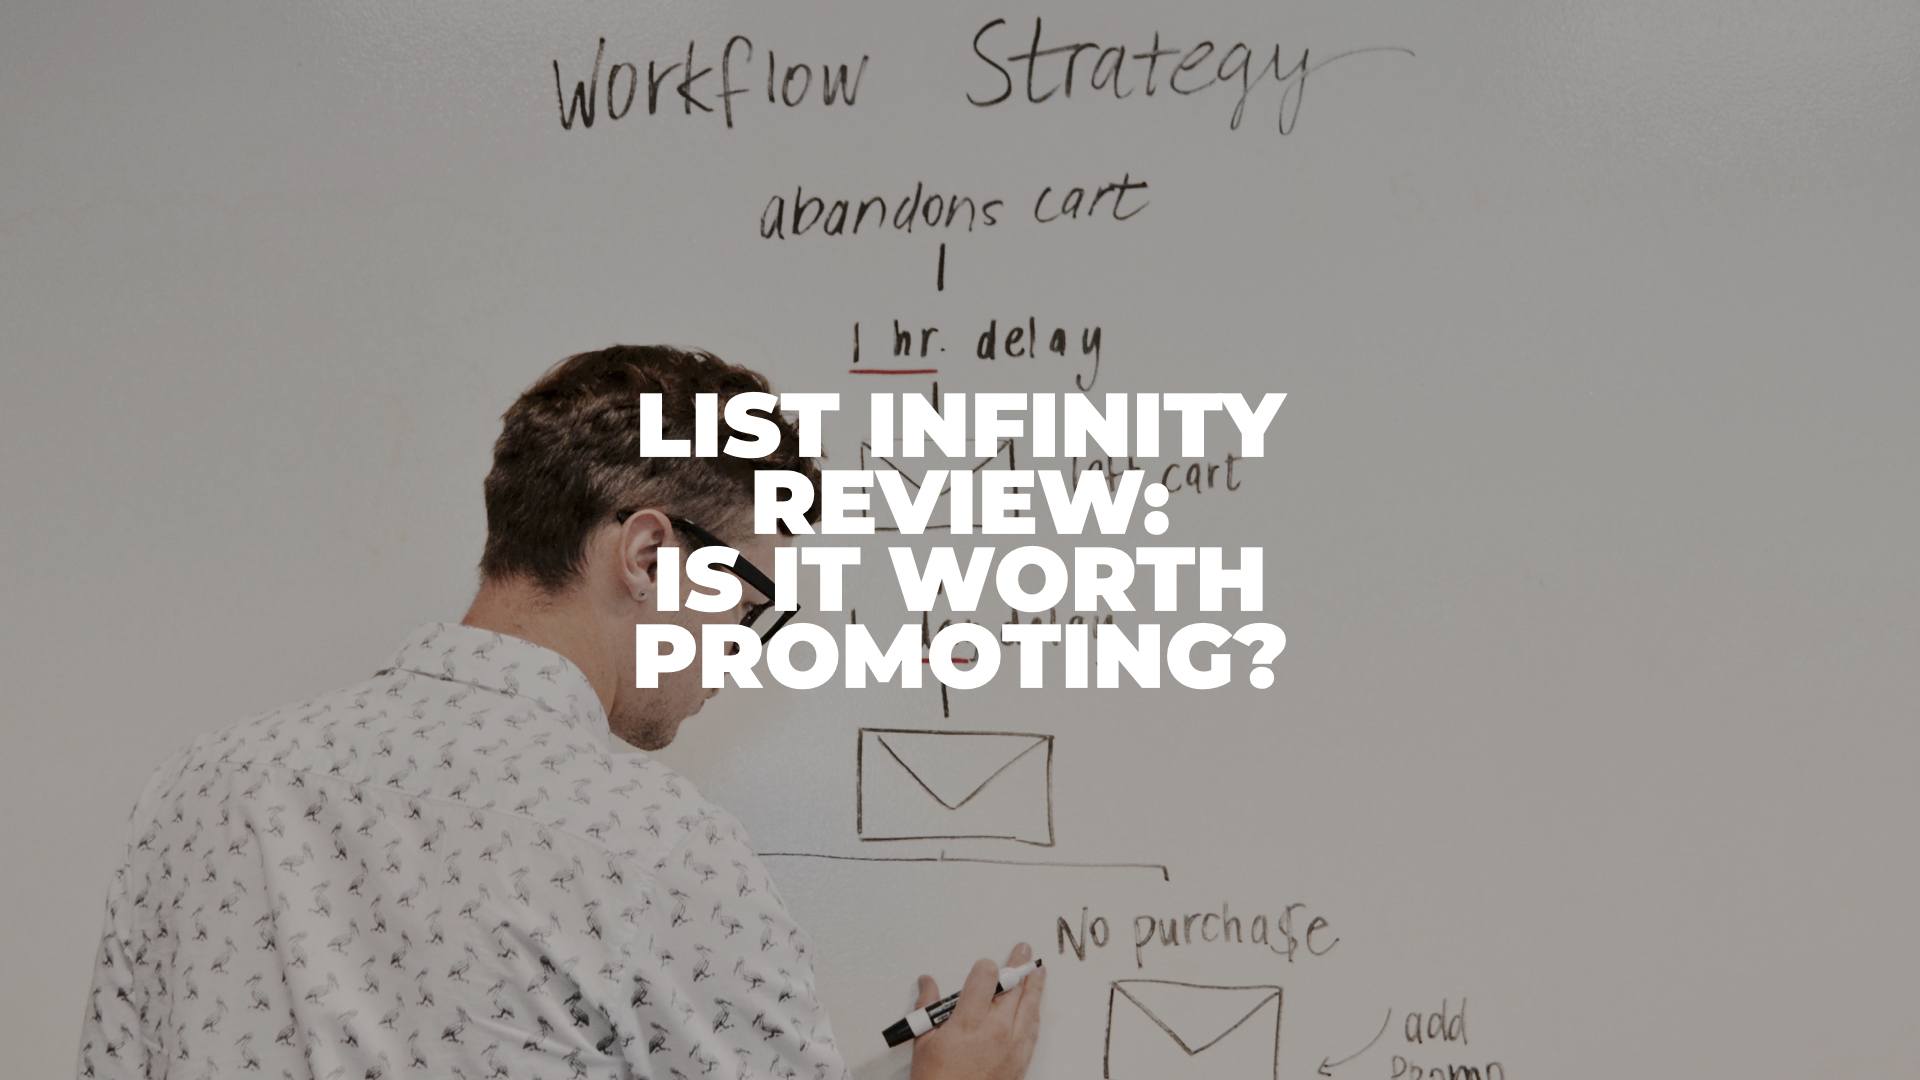 List Infinity Review - Featured Image